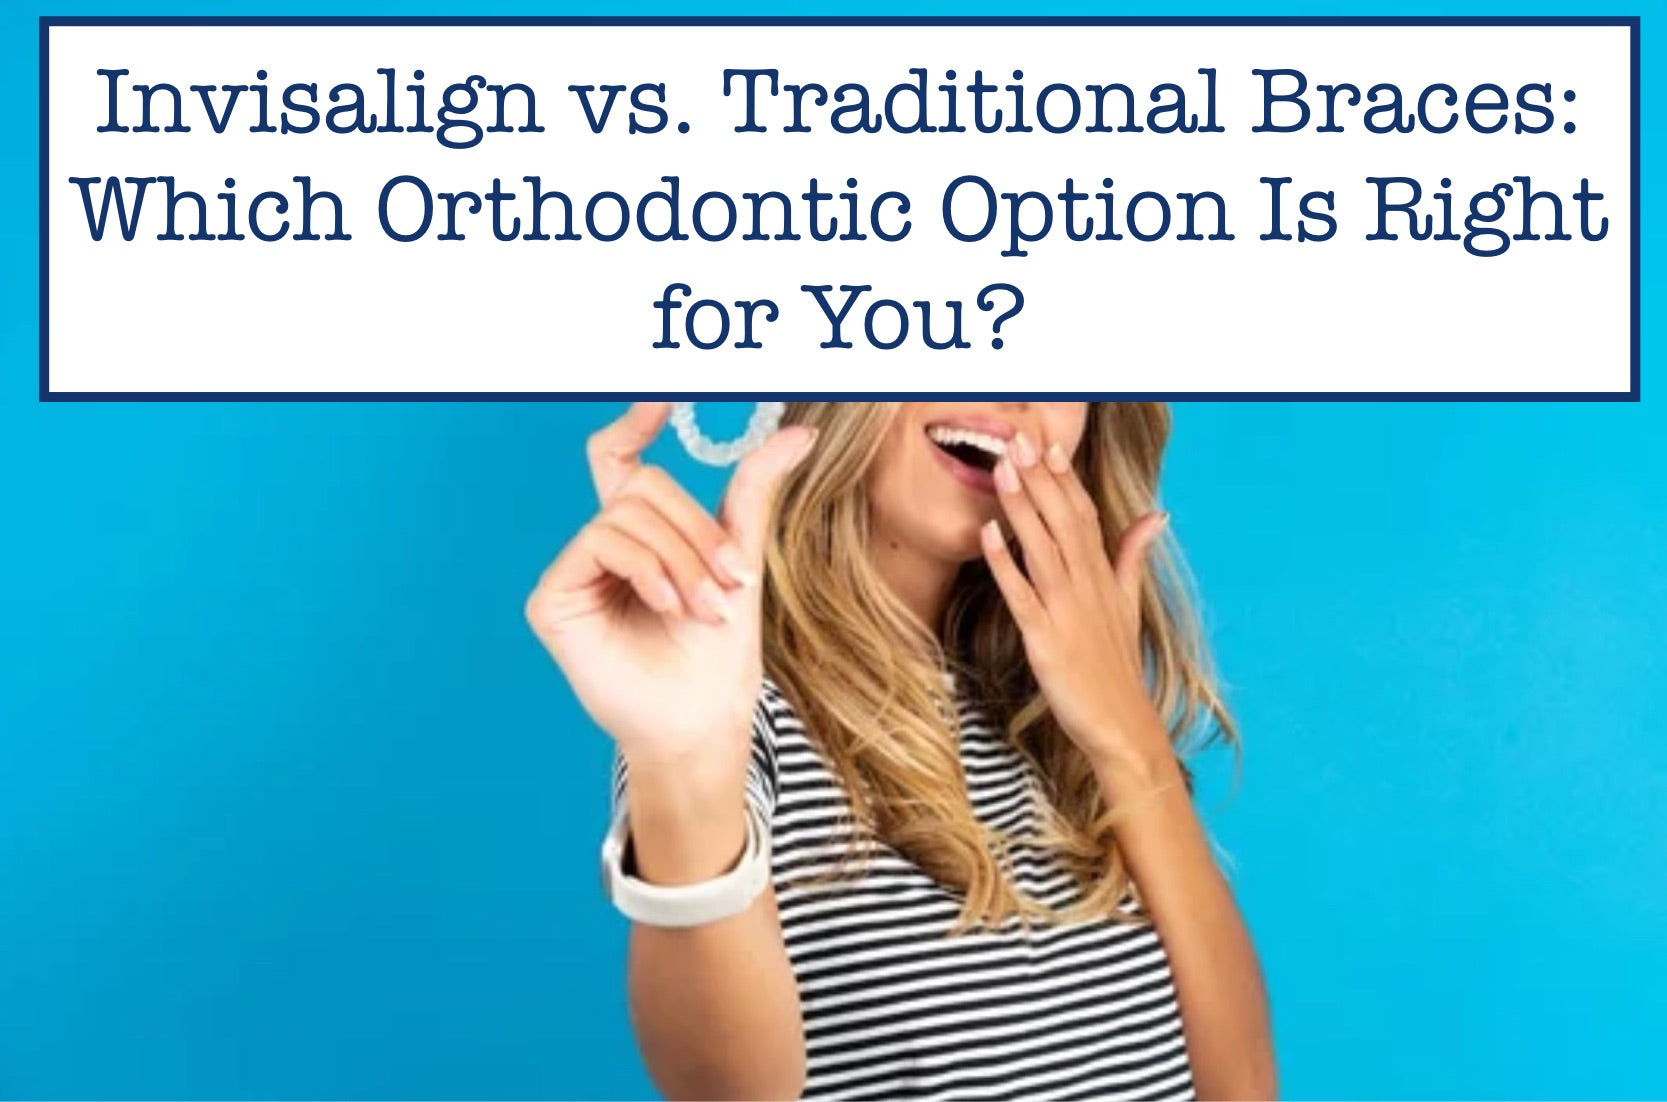 Invisalign vs. Traditional Braces: Which Orthodontic Option Is Right for You?